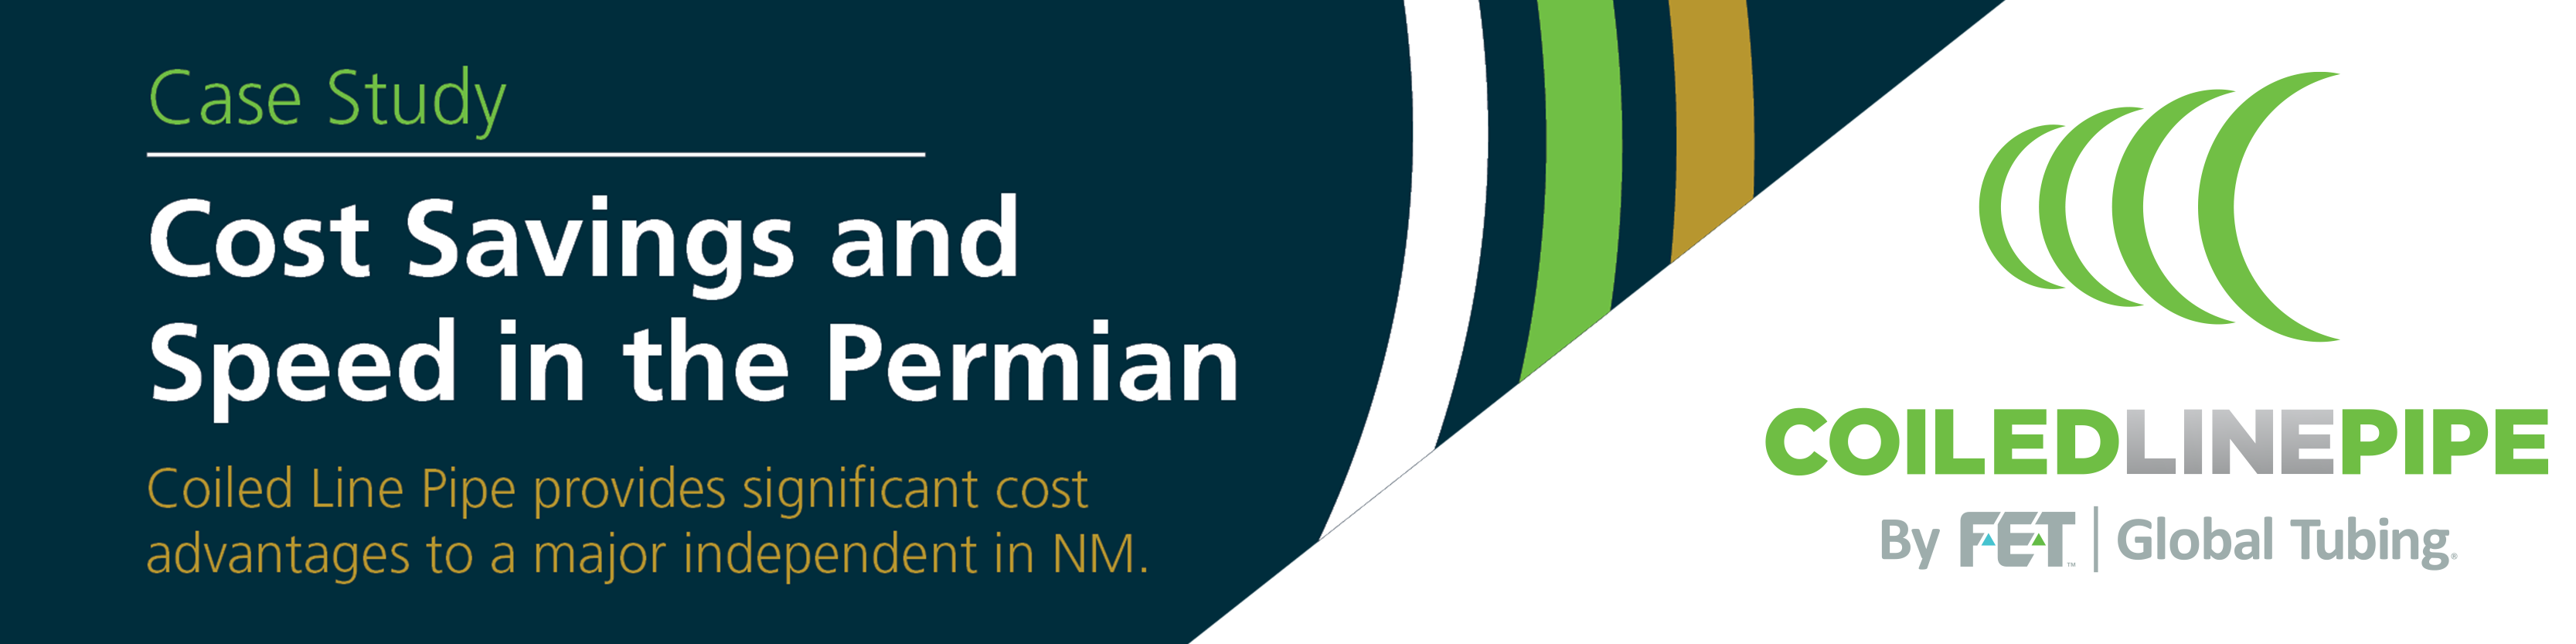 Cost Savings and Speed in the Permian Case Study